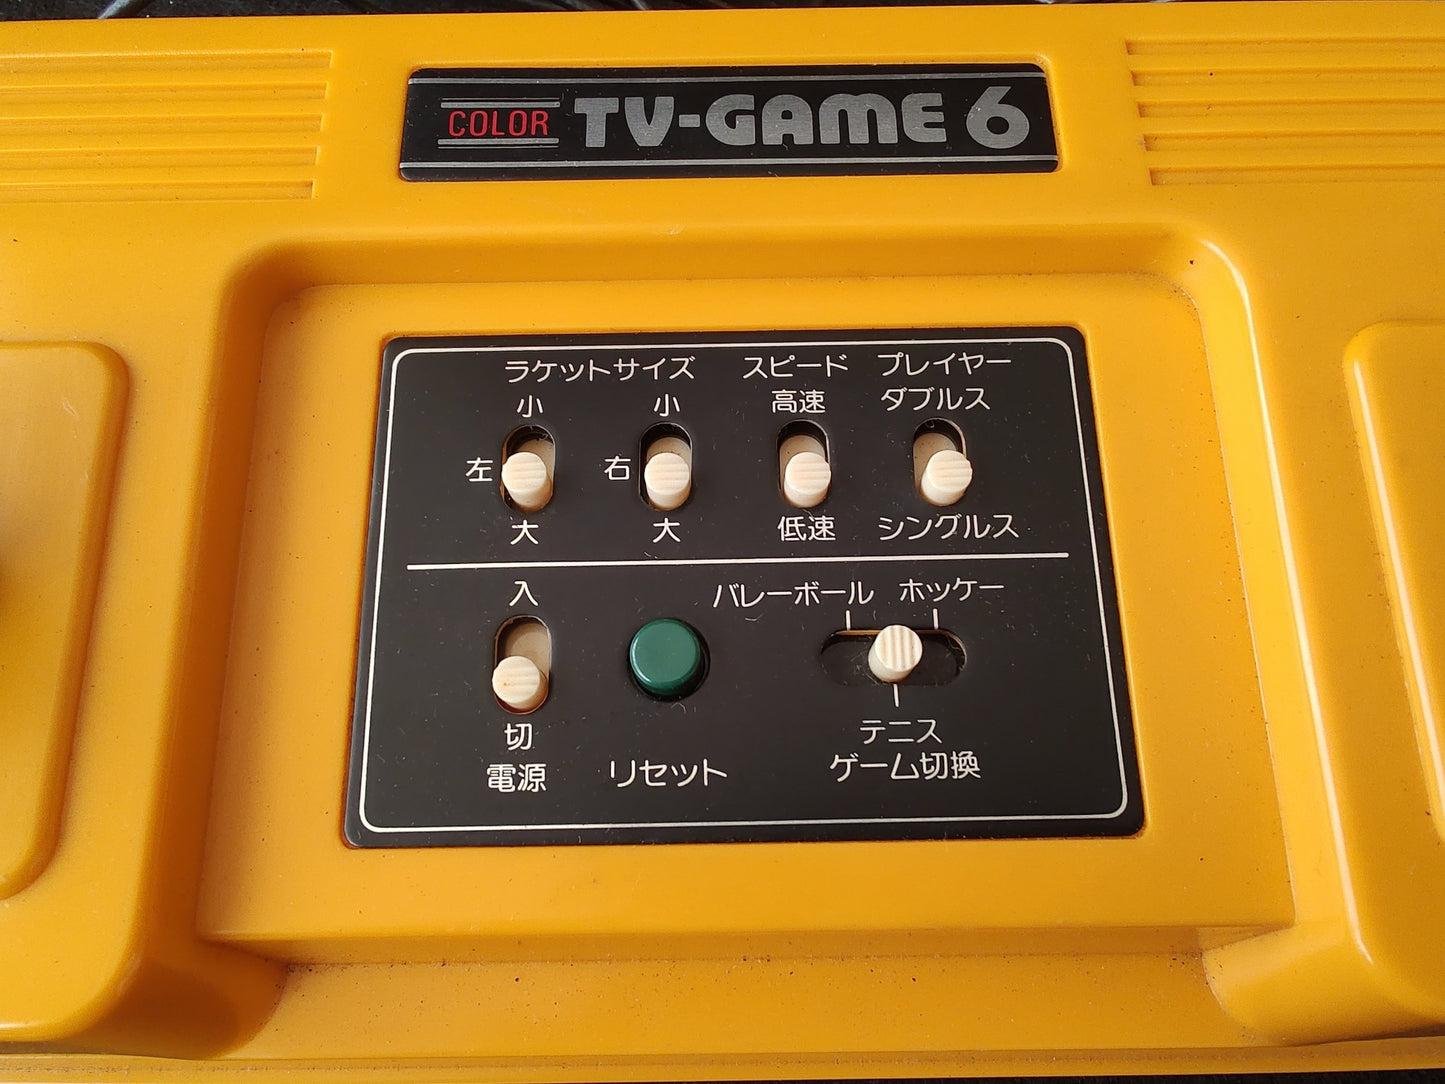 Nintendo TV GAME 6 (CTG-6V) Console,Manual and Box set, working-f1114-